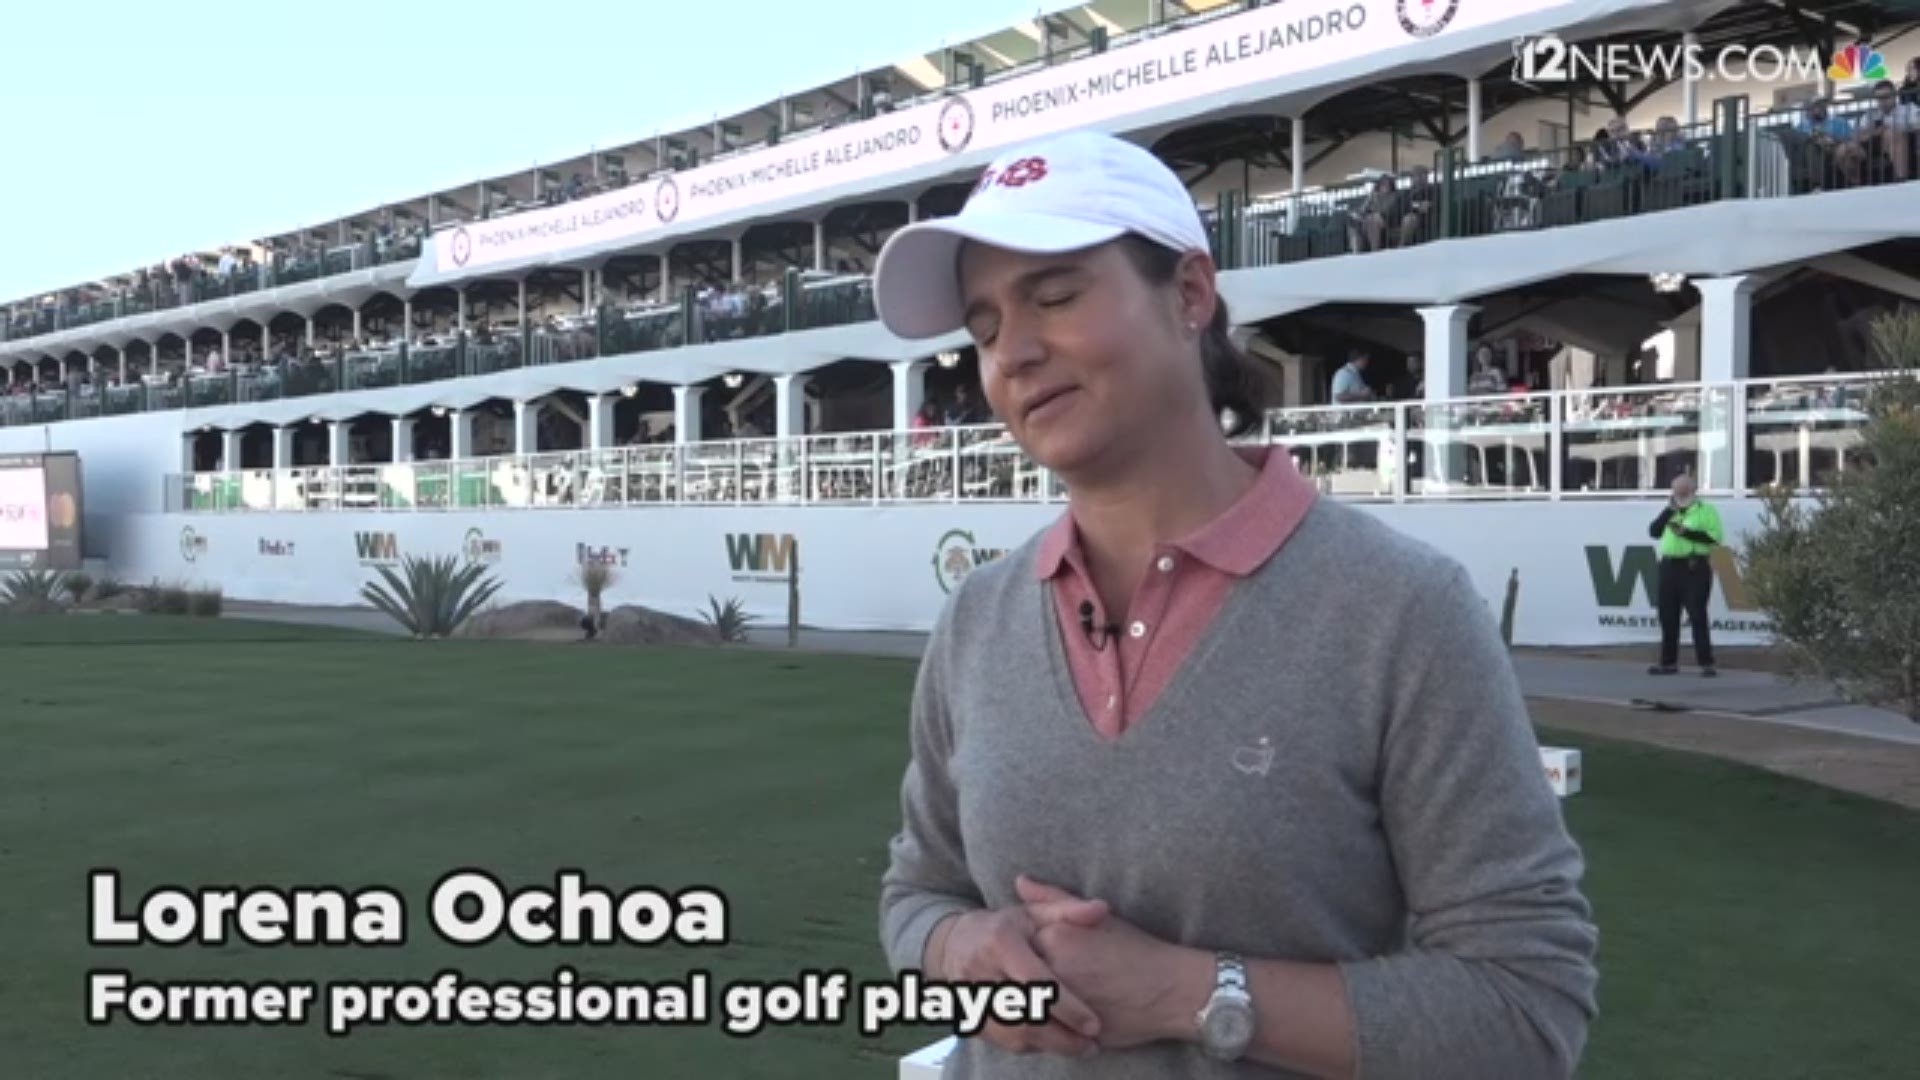 Lorena Ochoa played at the Waste Management Phoenix Open during the Pro-Am game Wednesday morning.